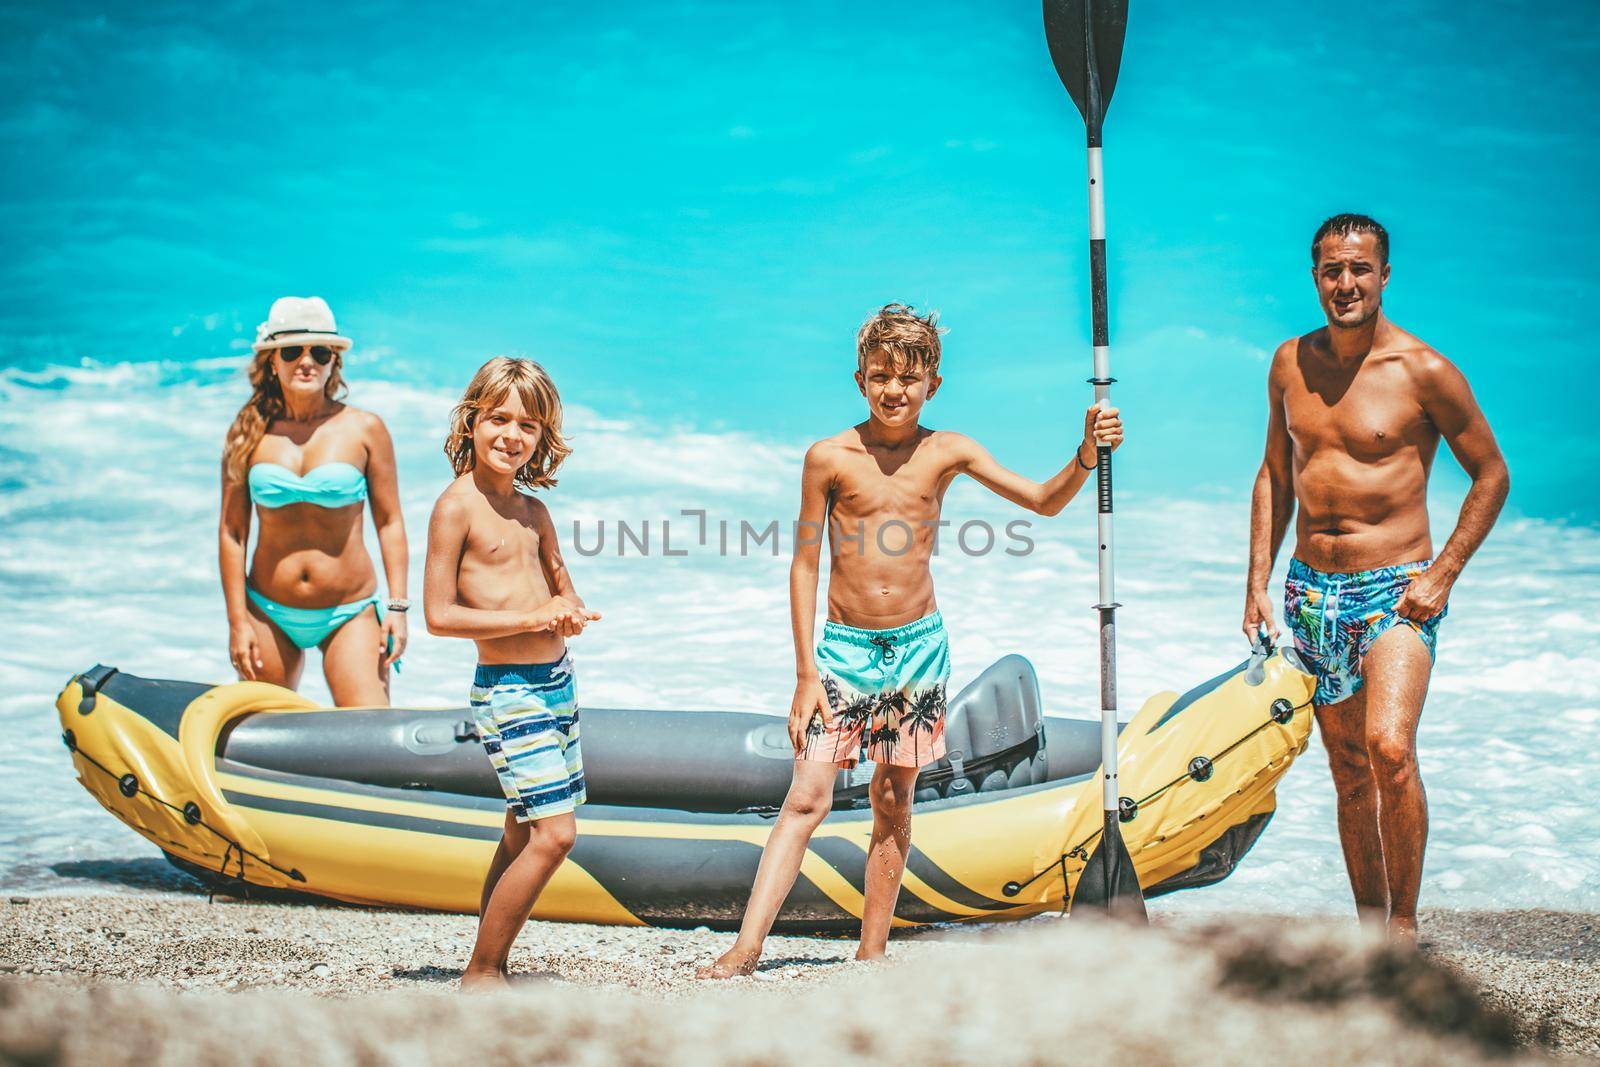 Rubber kayak is prepared for happy family sailing at the beach. 